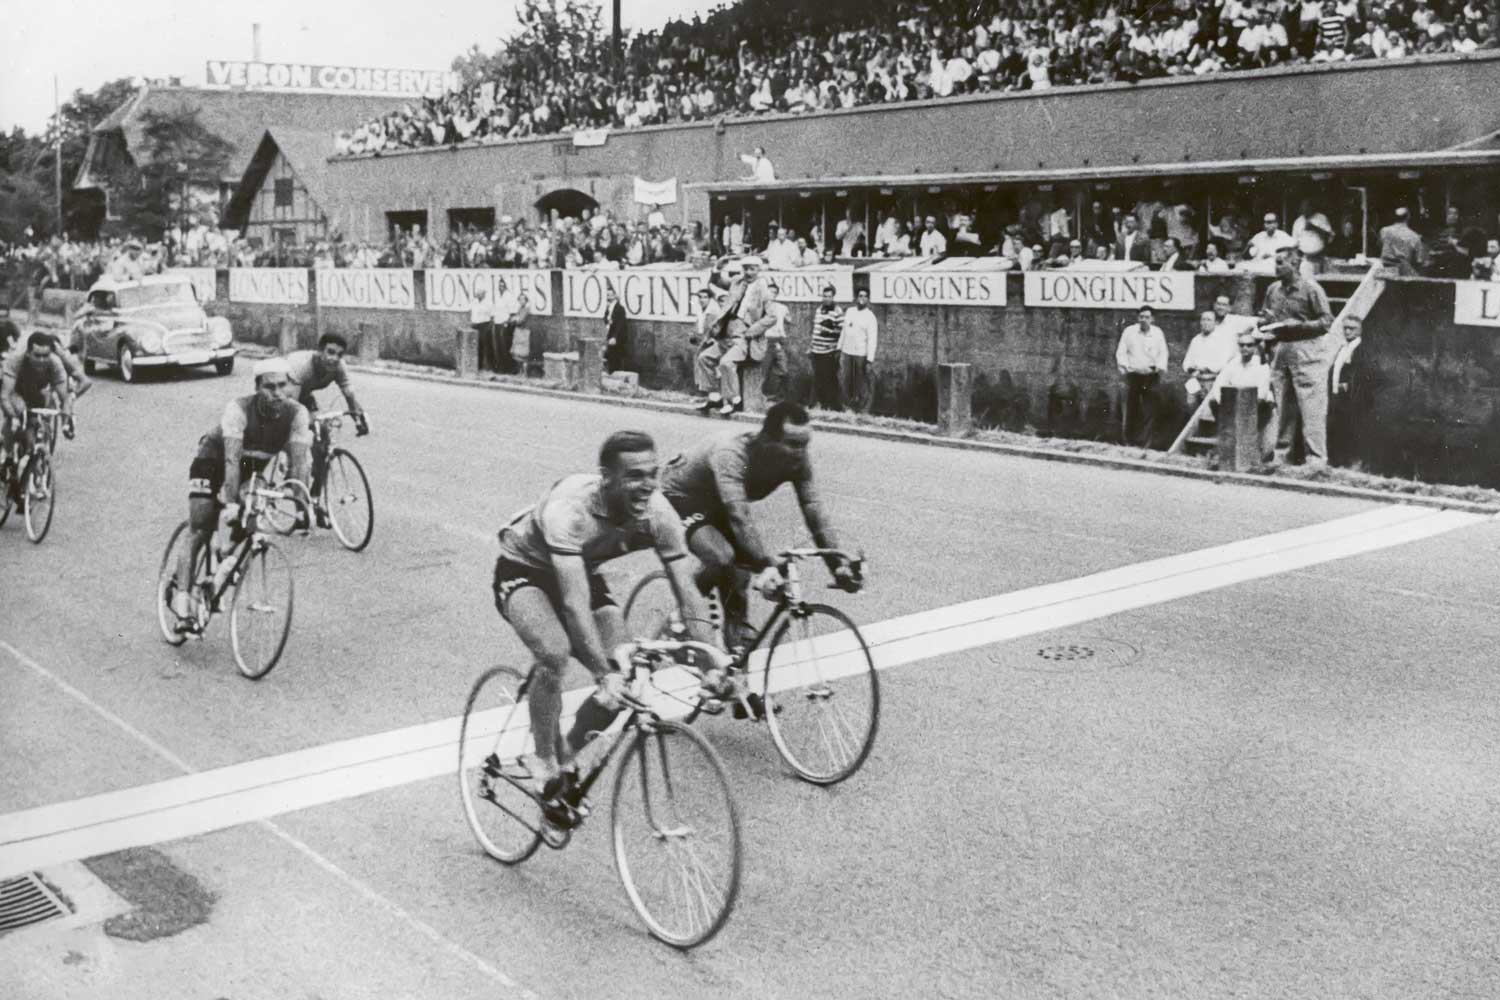 Longines was Official Timekeeper of the Tour de France until 1982. Longines timed the world track and road championships 28 times — as well as famous events like the Giro d’Italia or the Vuelta in Spain